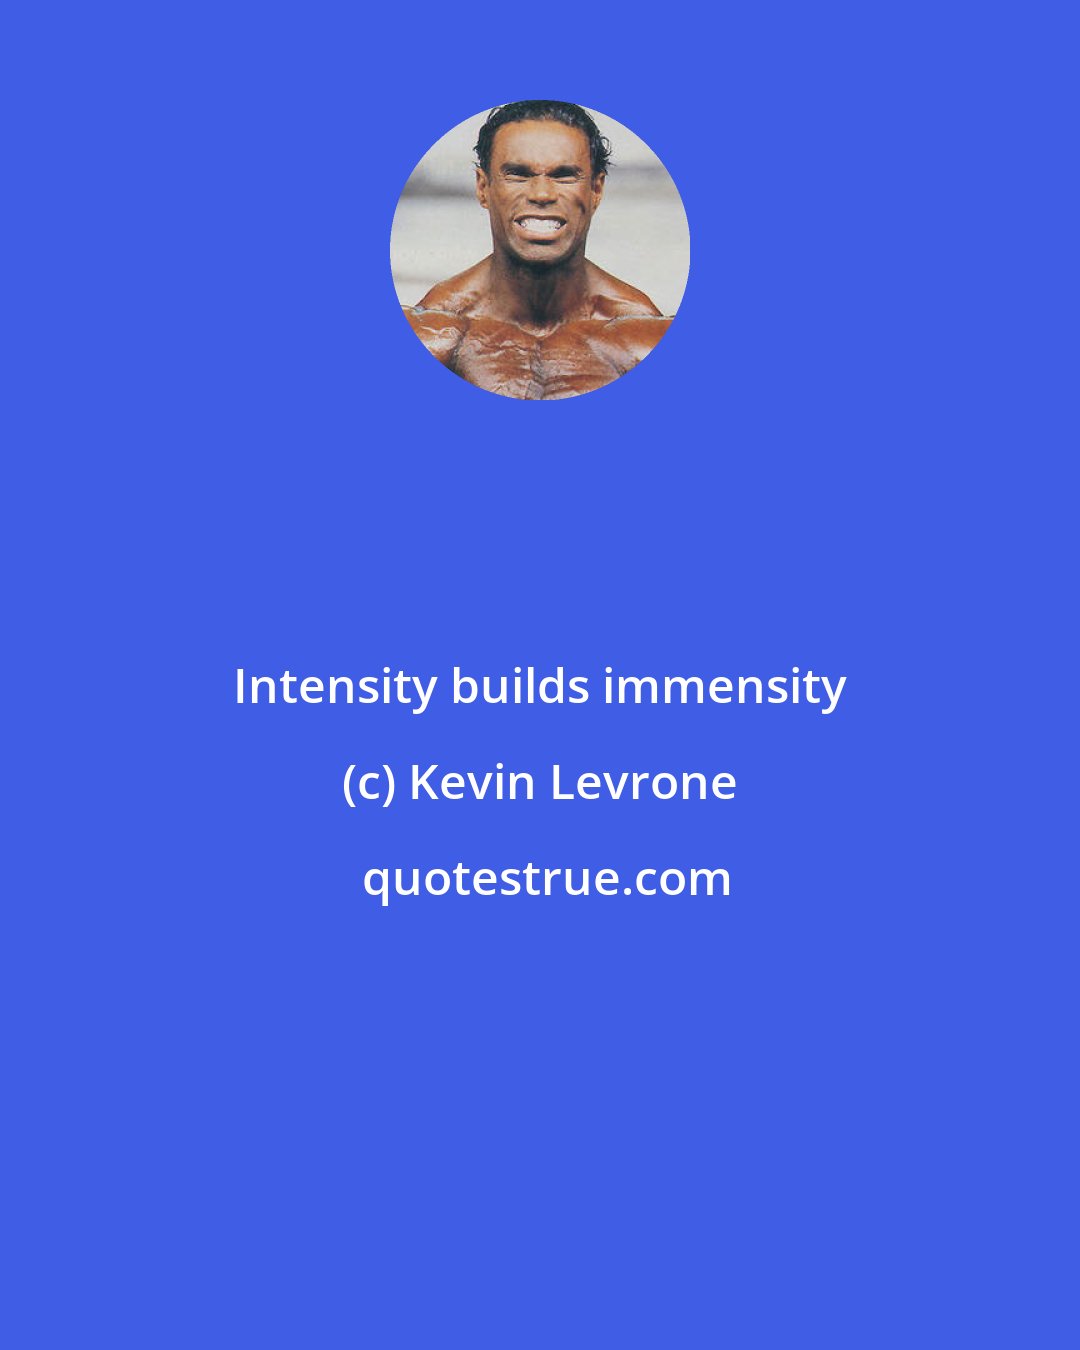 Kevin Levrone: Intensity builds immensity